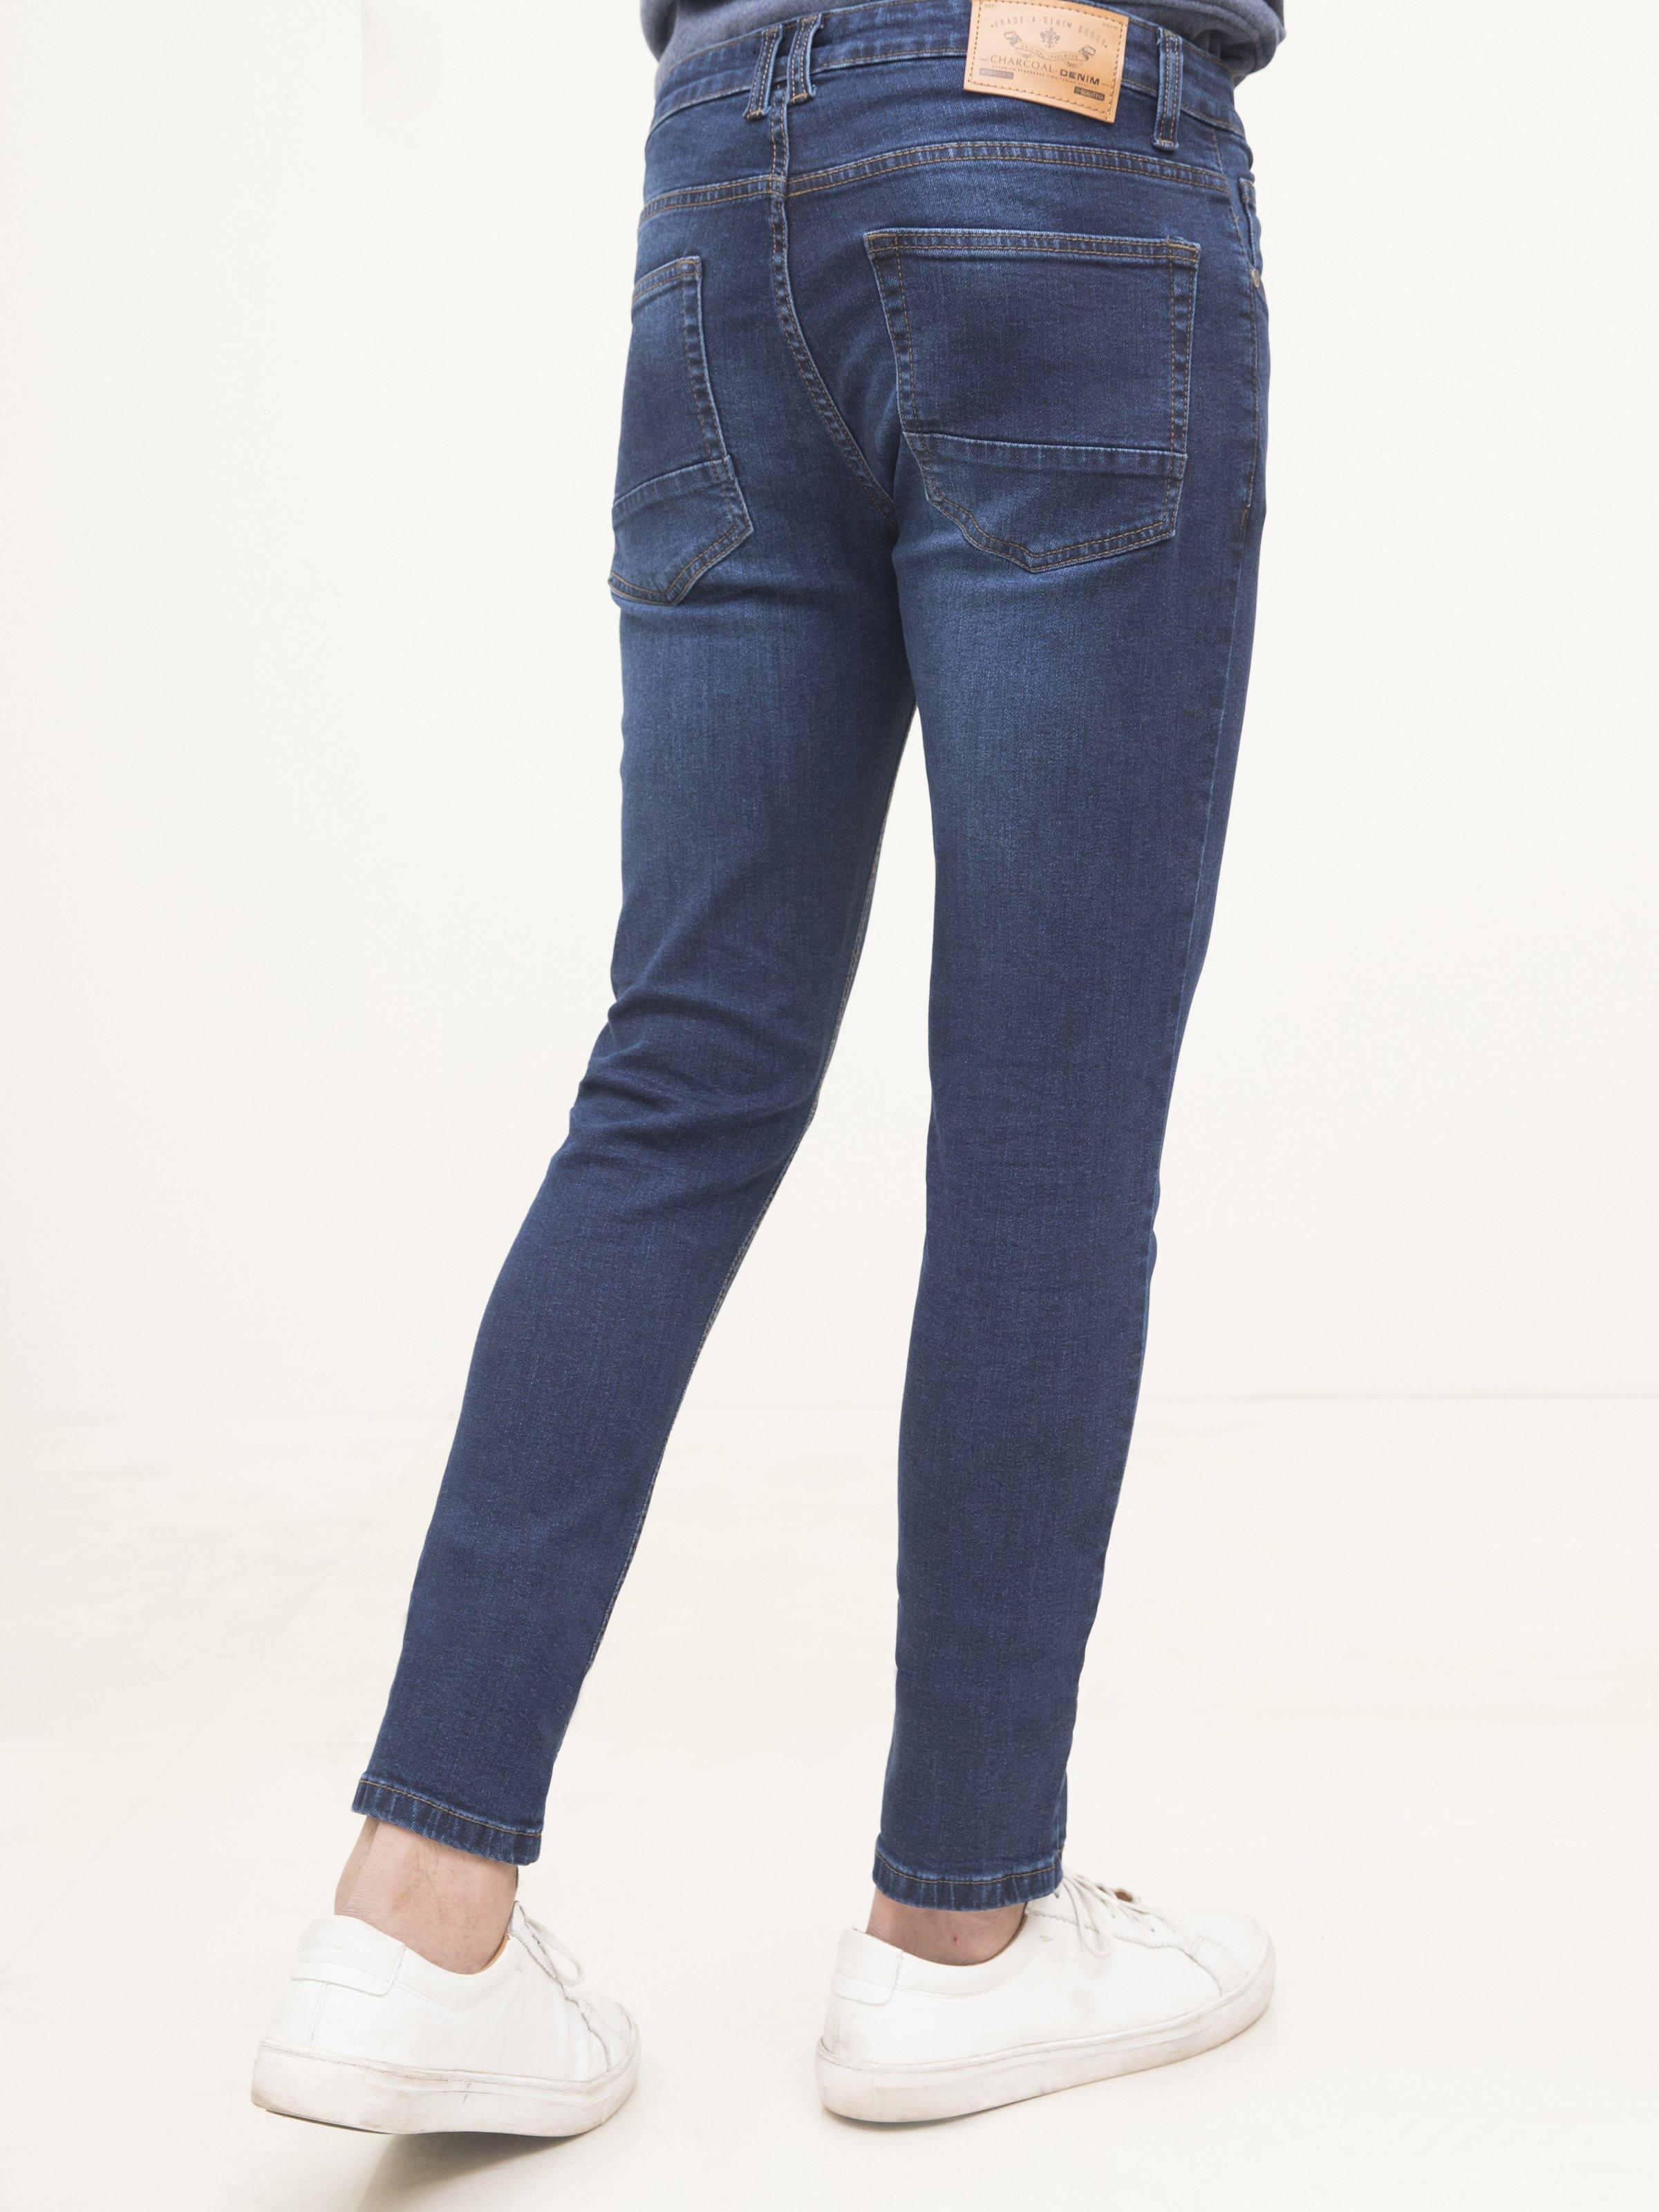 SLIM FIT JEANS DARK BLUE at Charcoal Clothing